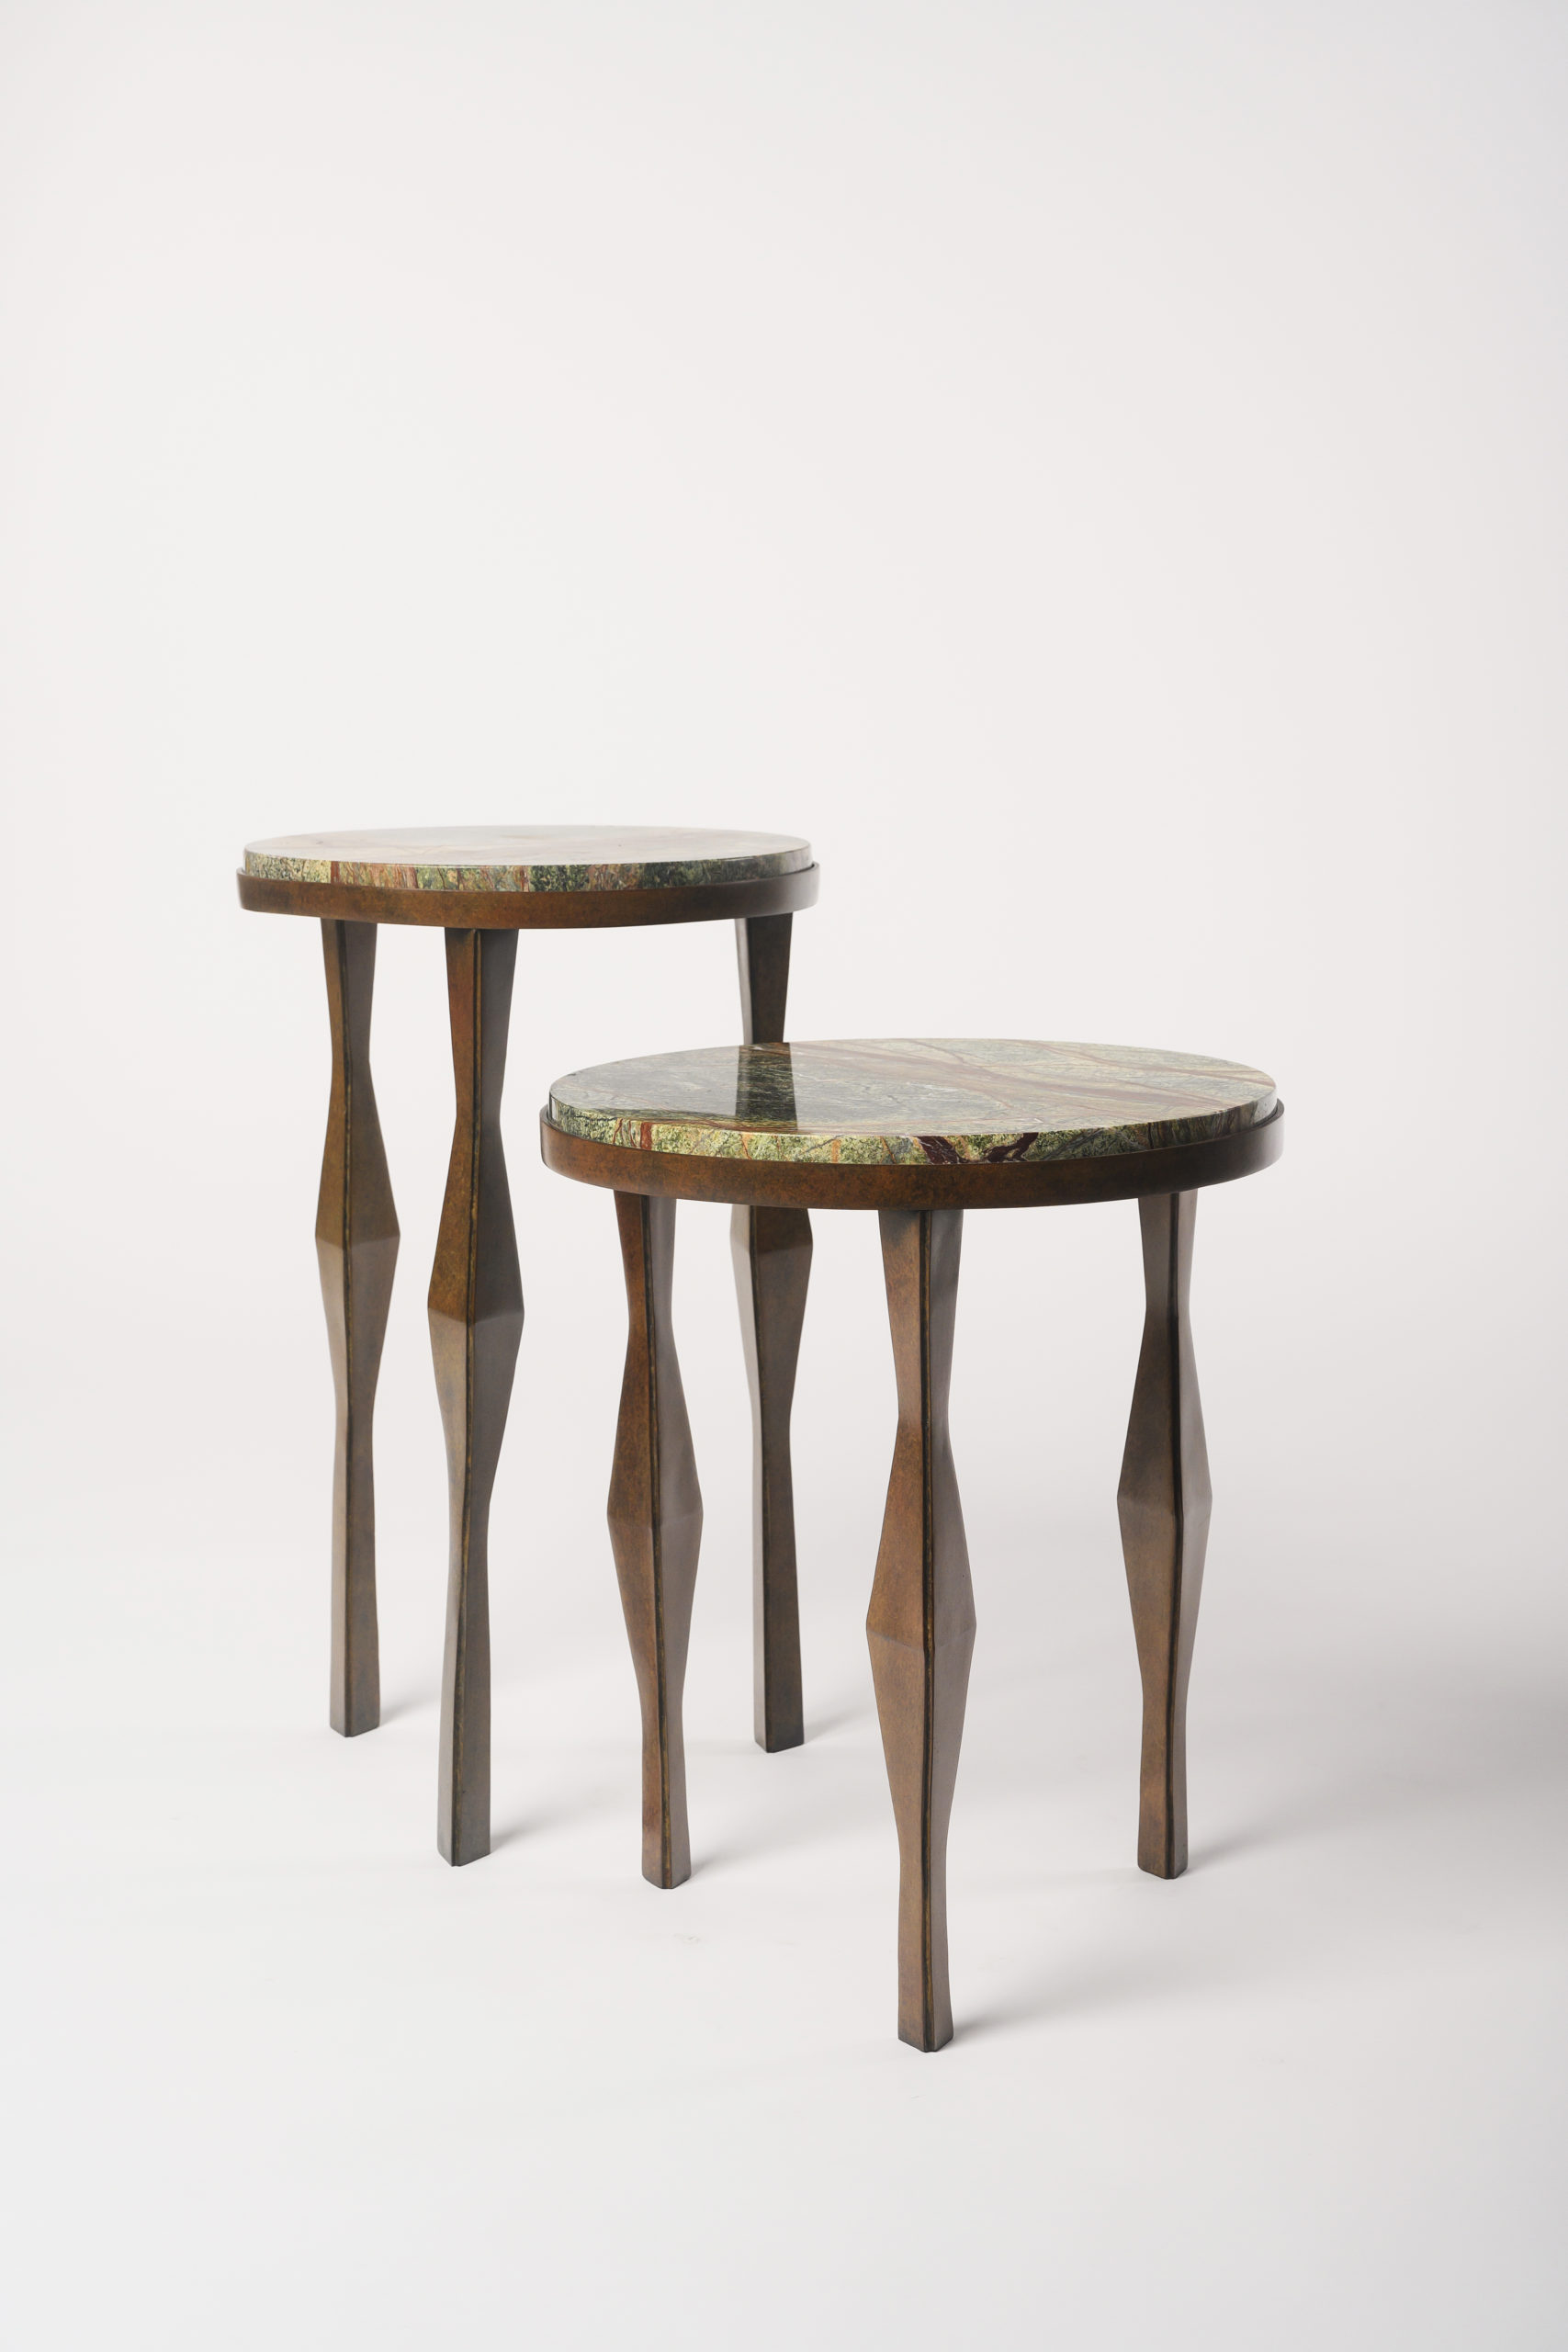 NYDC_WNWN_products_david_sutherland_Arthur_side_table_BEE_4956